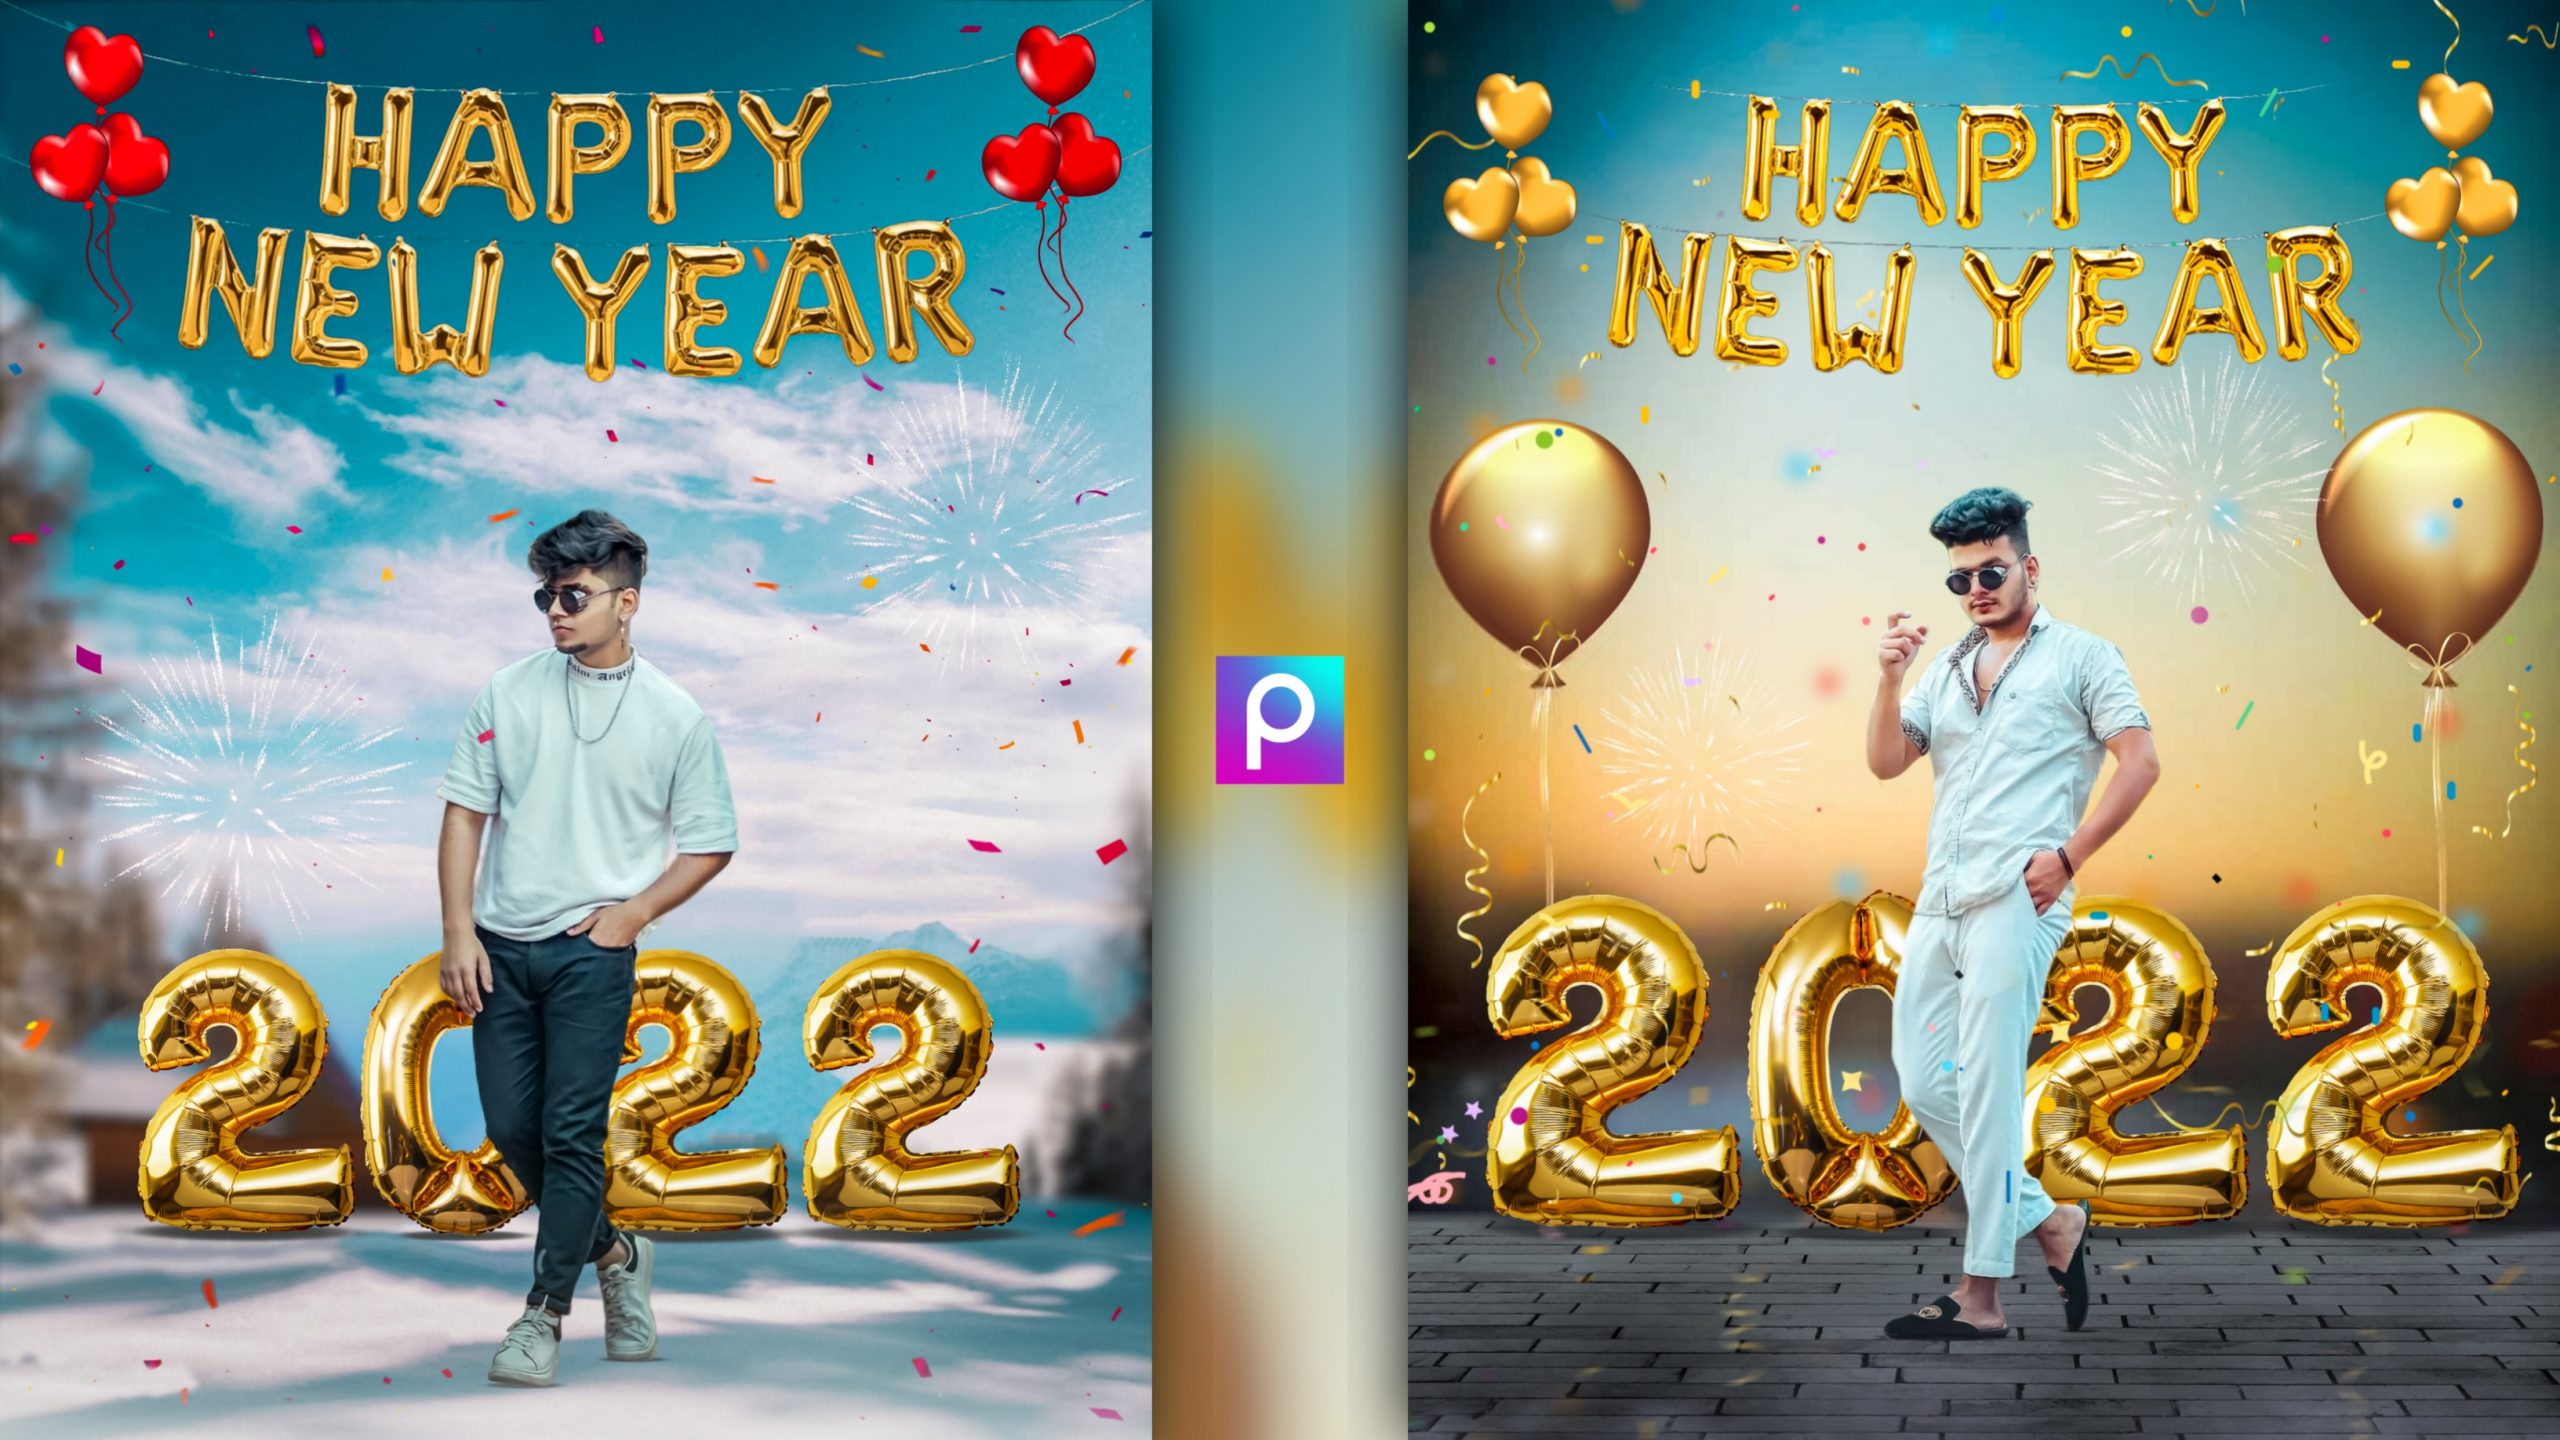 PicsArt Happy New Year 2022 Photo Editing Download Background And PNG  Archives - Tahir Editz